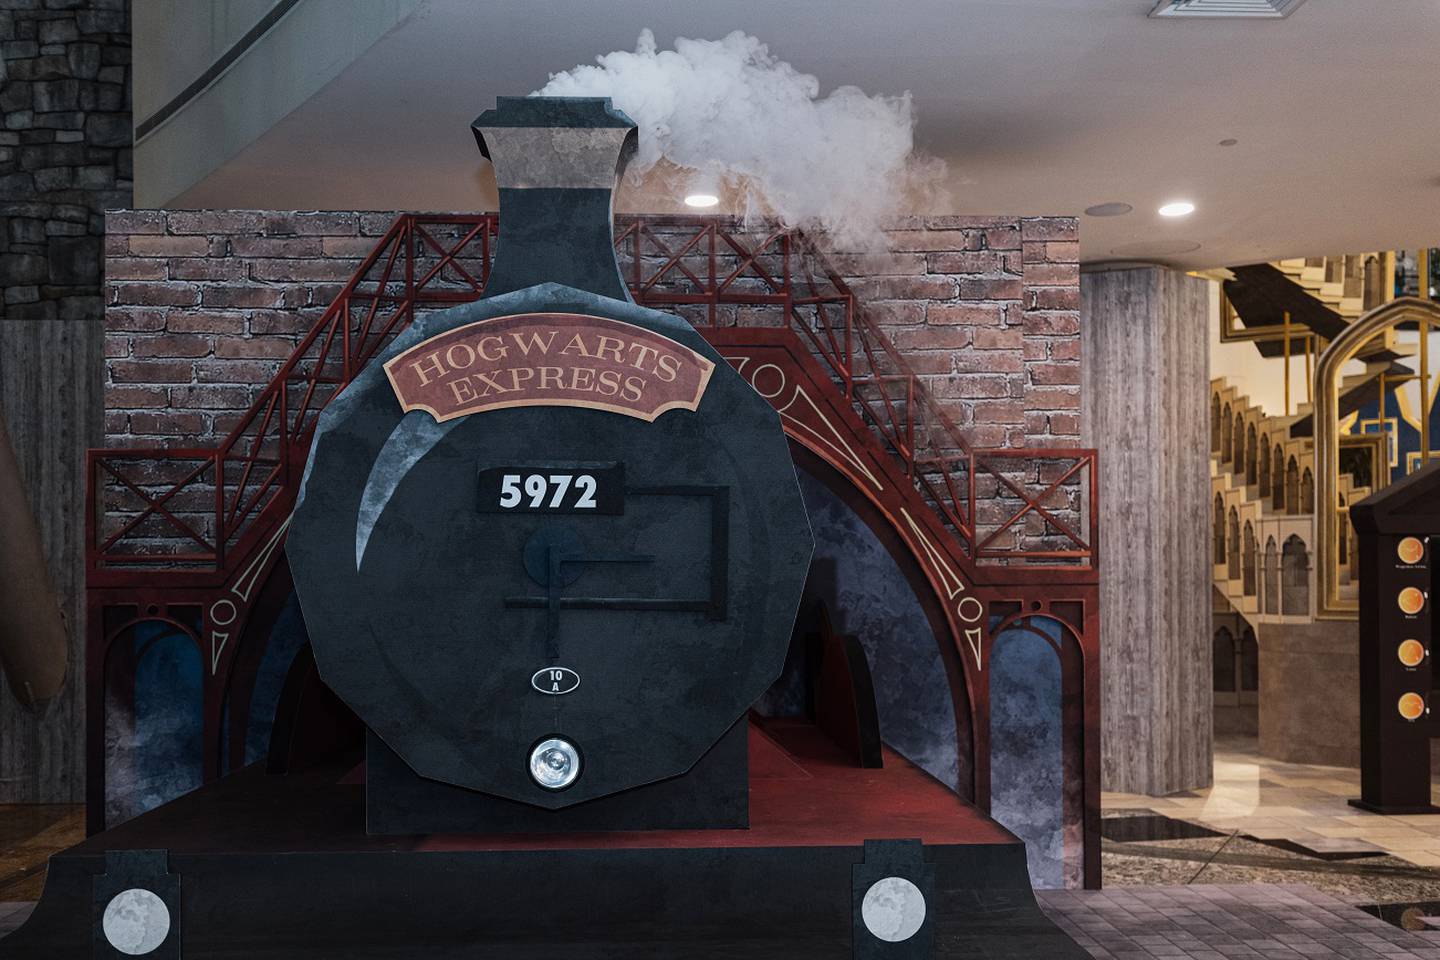 Check out a replica of the Hogwarts Express at the Harry Potter: Celebrate Hogwarts experience in Abu Dhabi this month. Photo: Abu Dhabi Mall